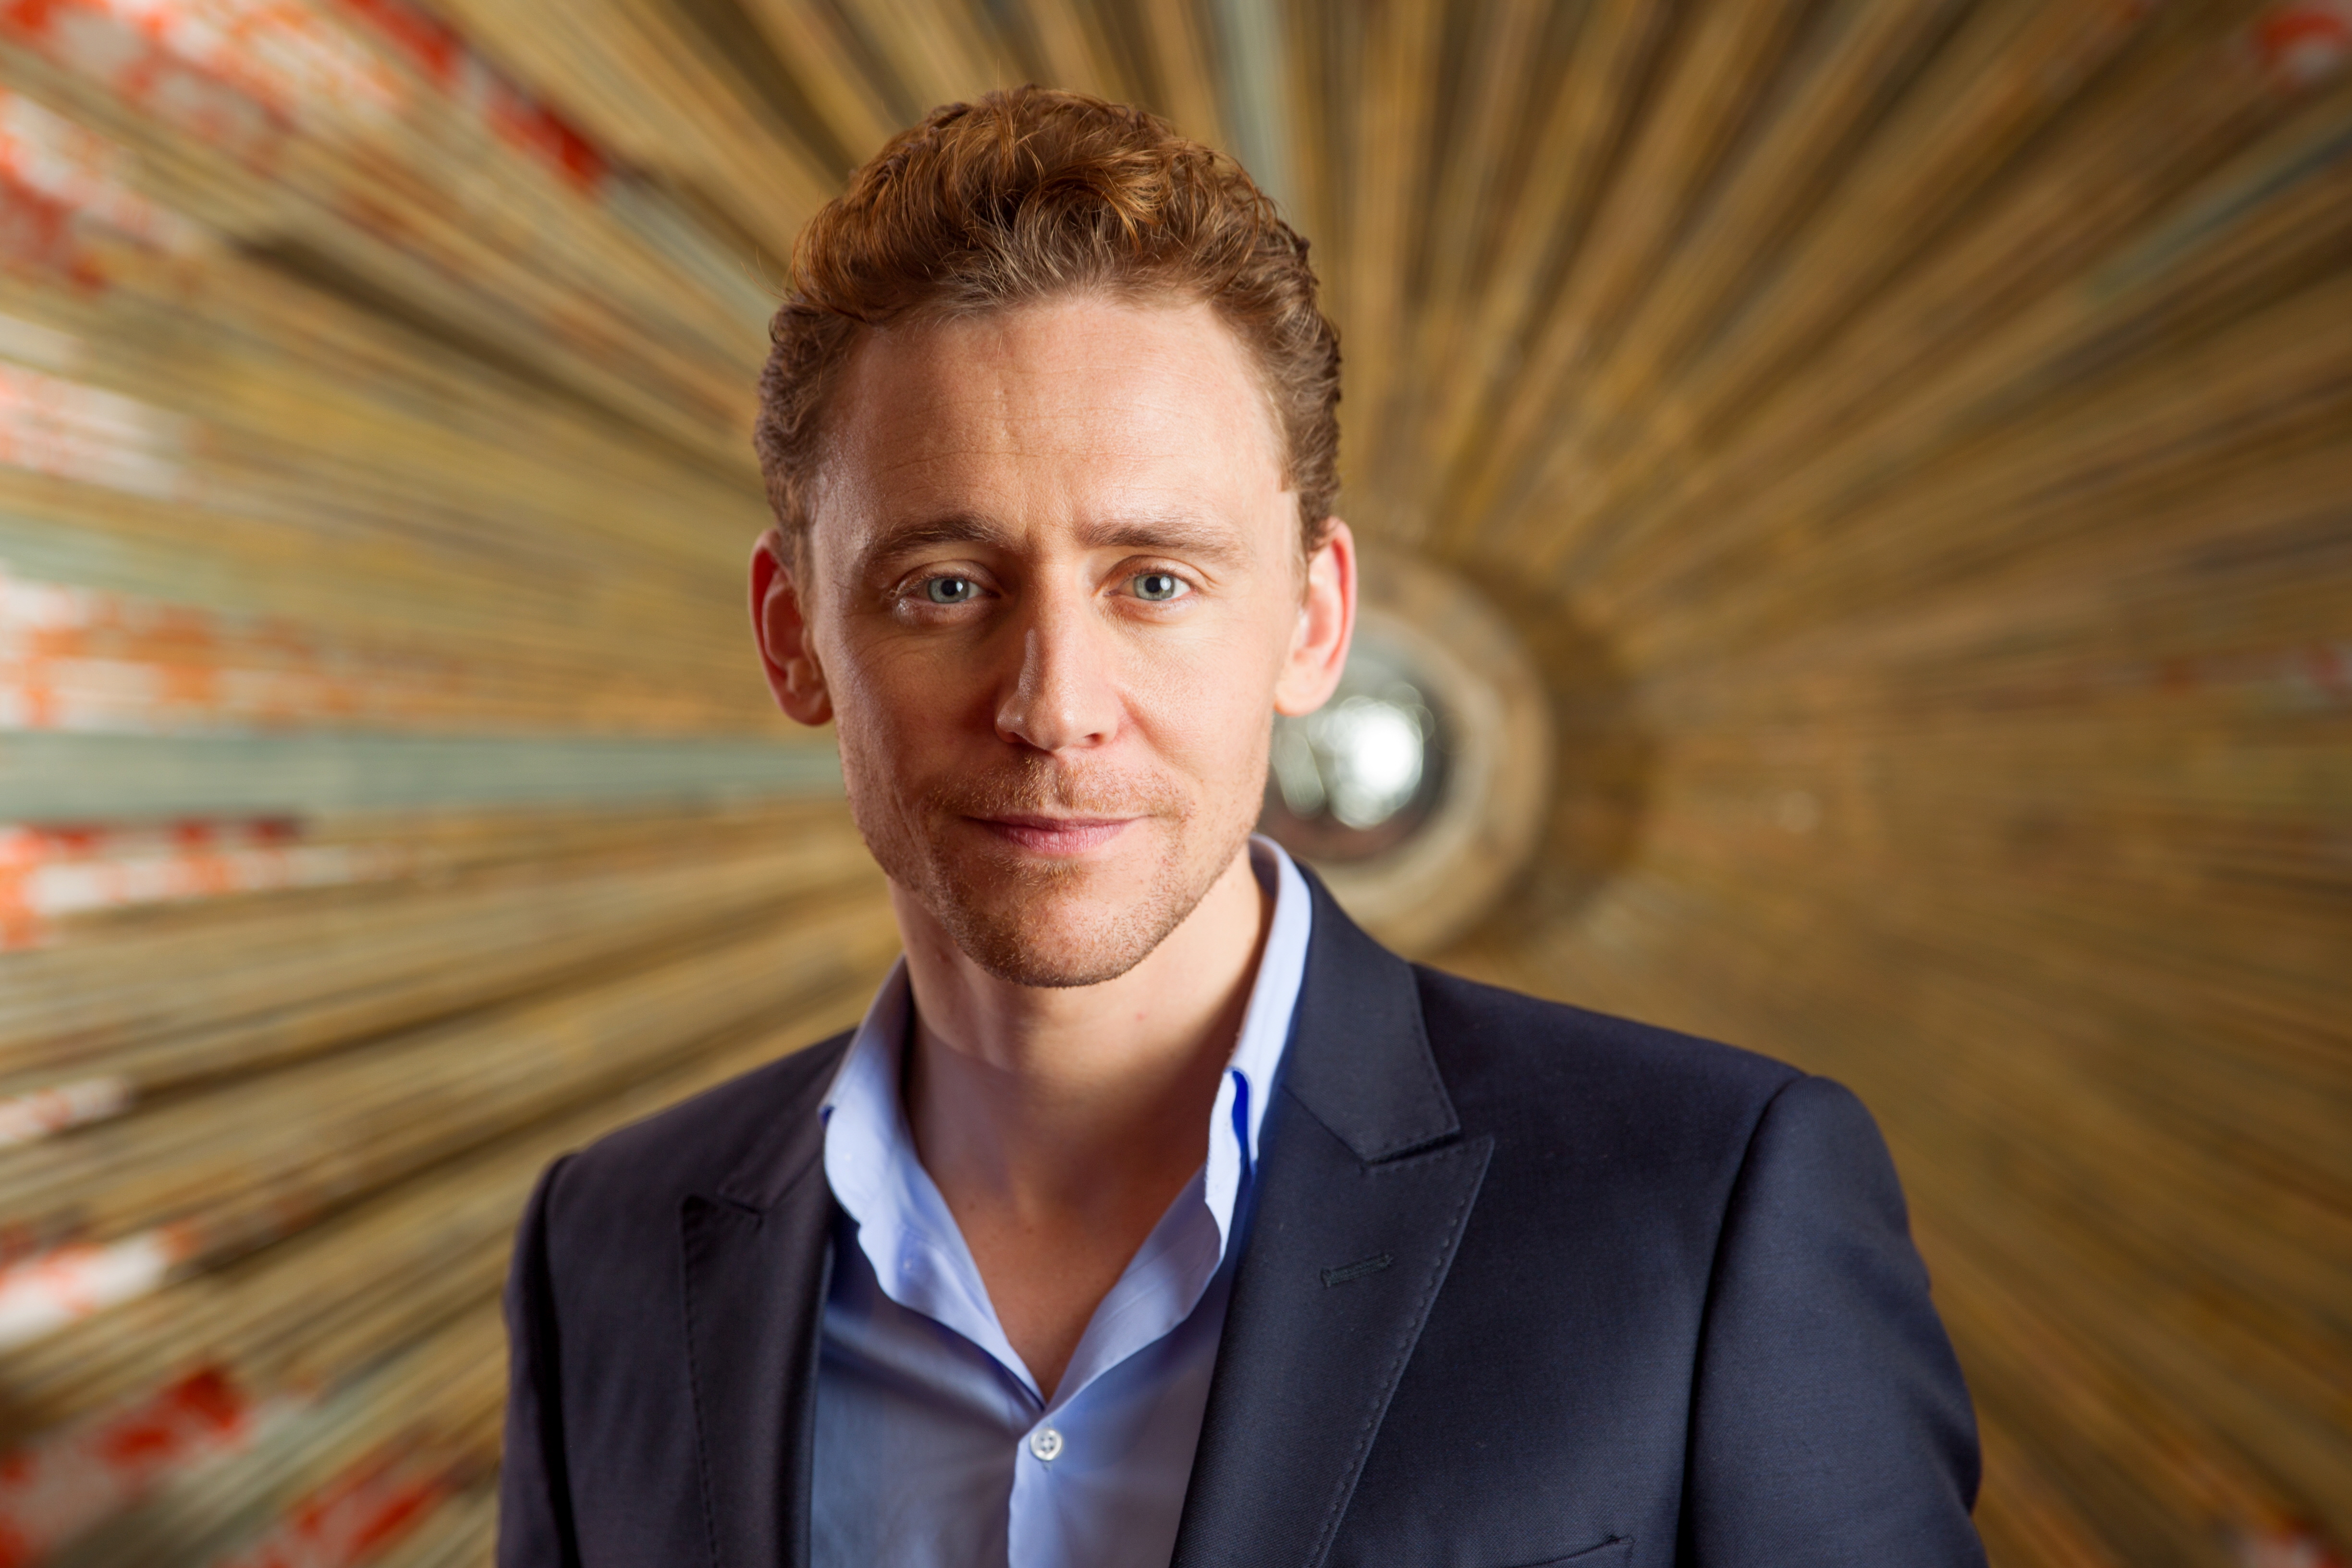 Tom Hiddleston Infp The Book Addict S Guide To Mbti